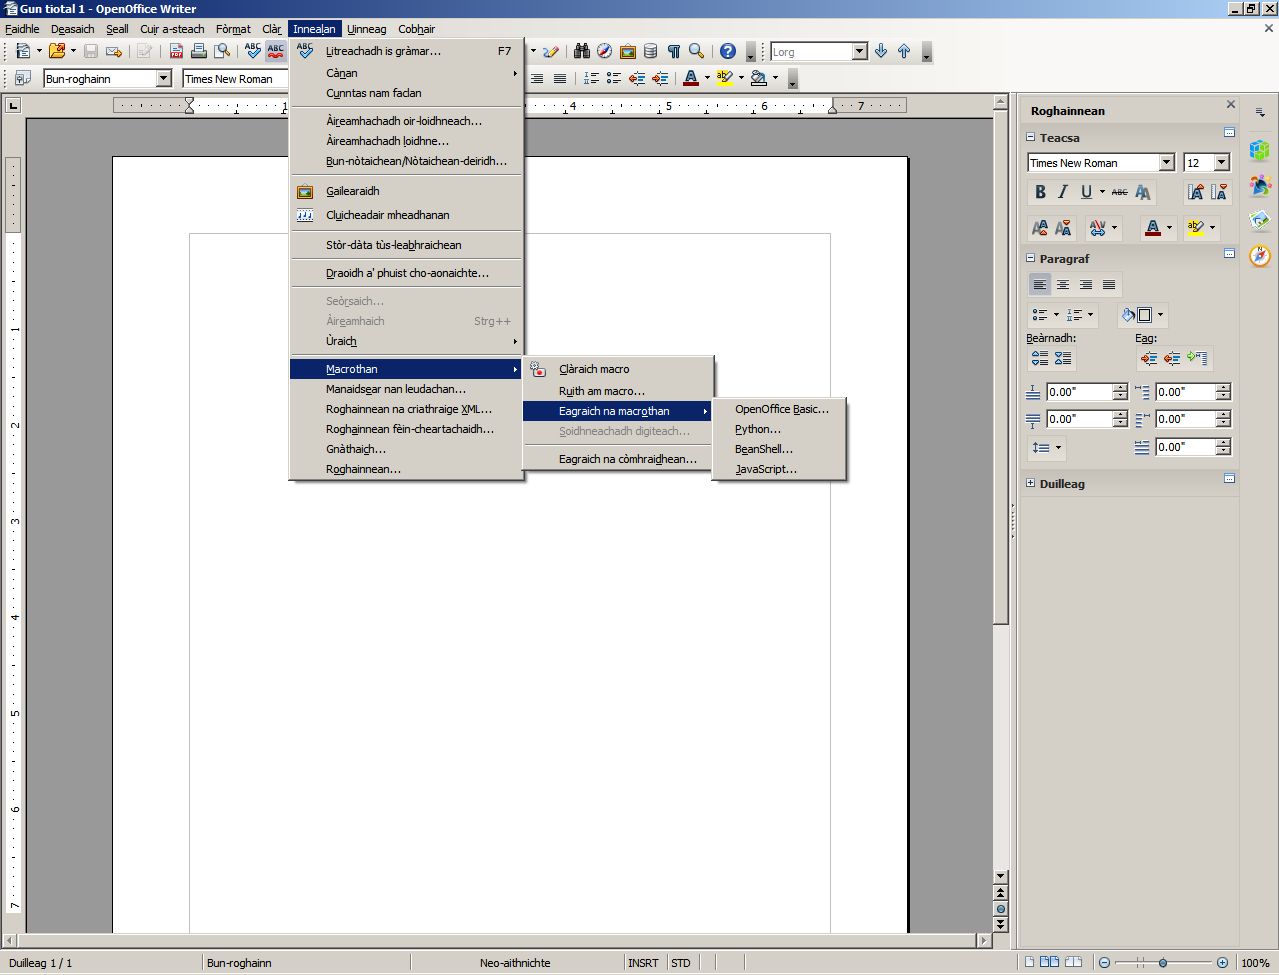 apache openoffice for mac tablet